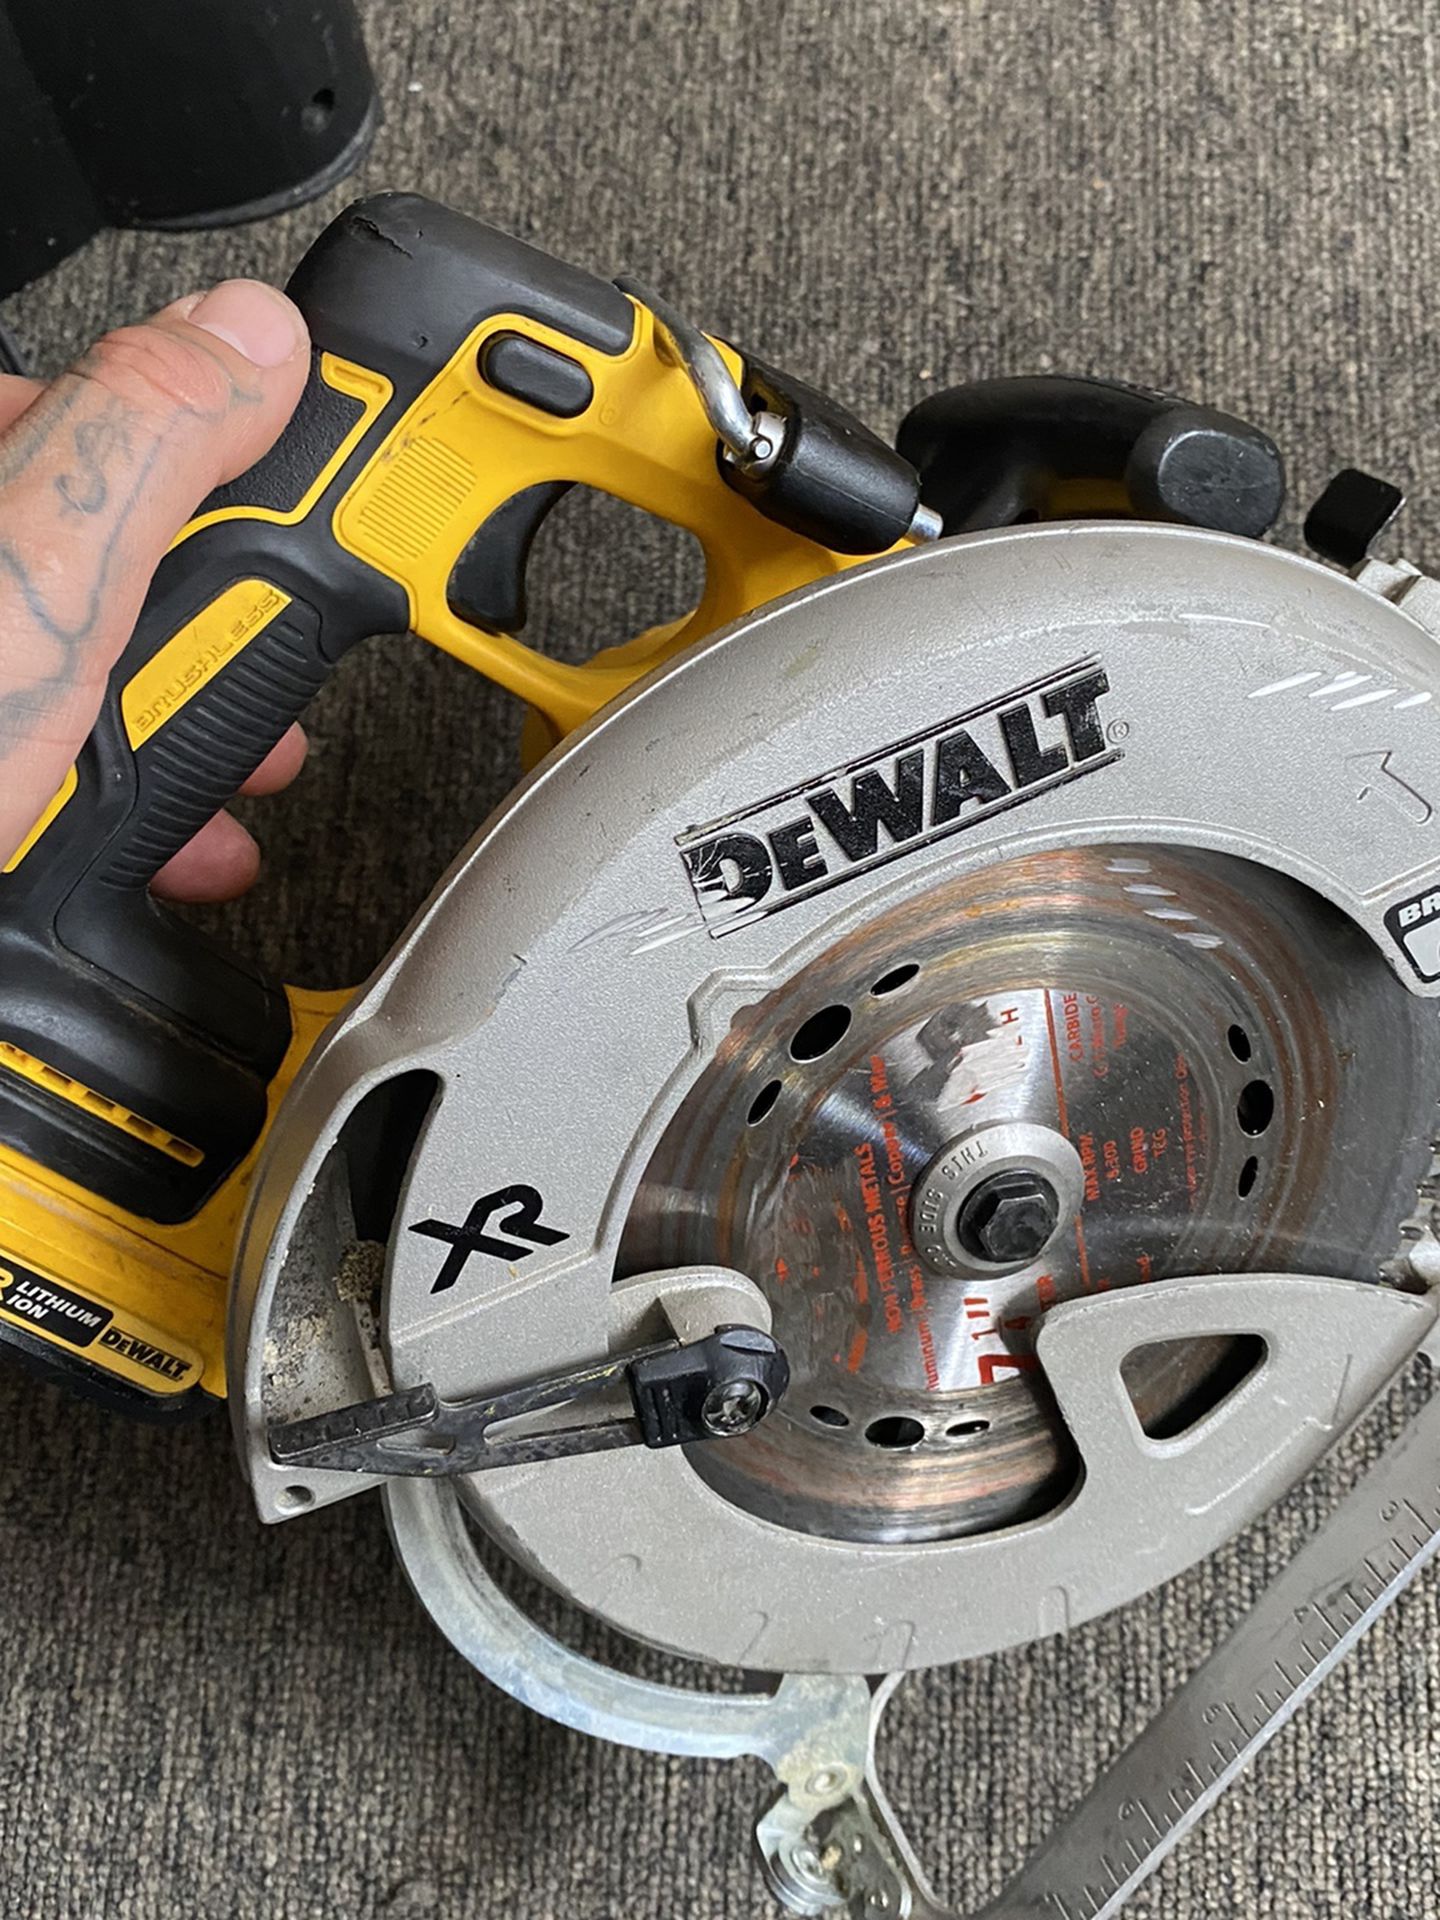 On sale brushless motor dewalt XR circular saw whit brake comes whit small battery $$$190 dollars firm price in oakland